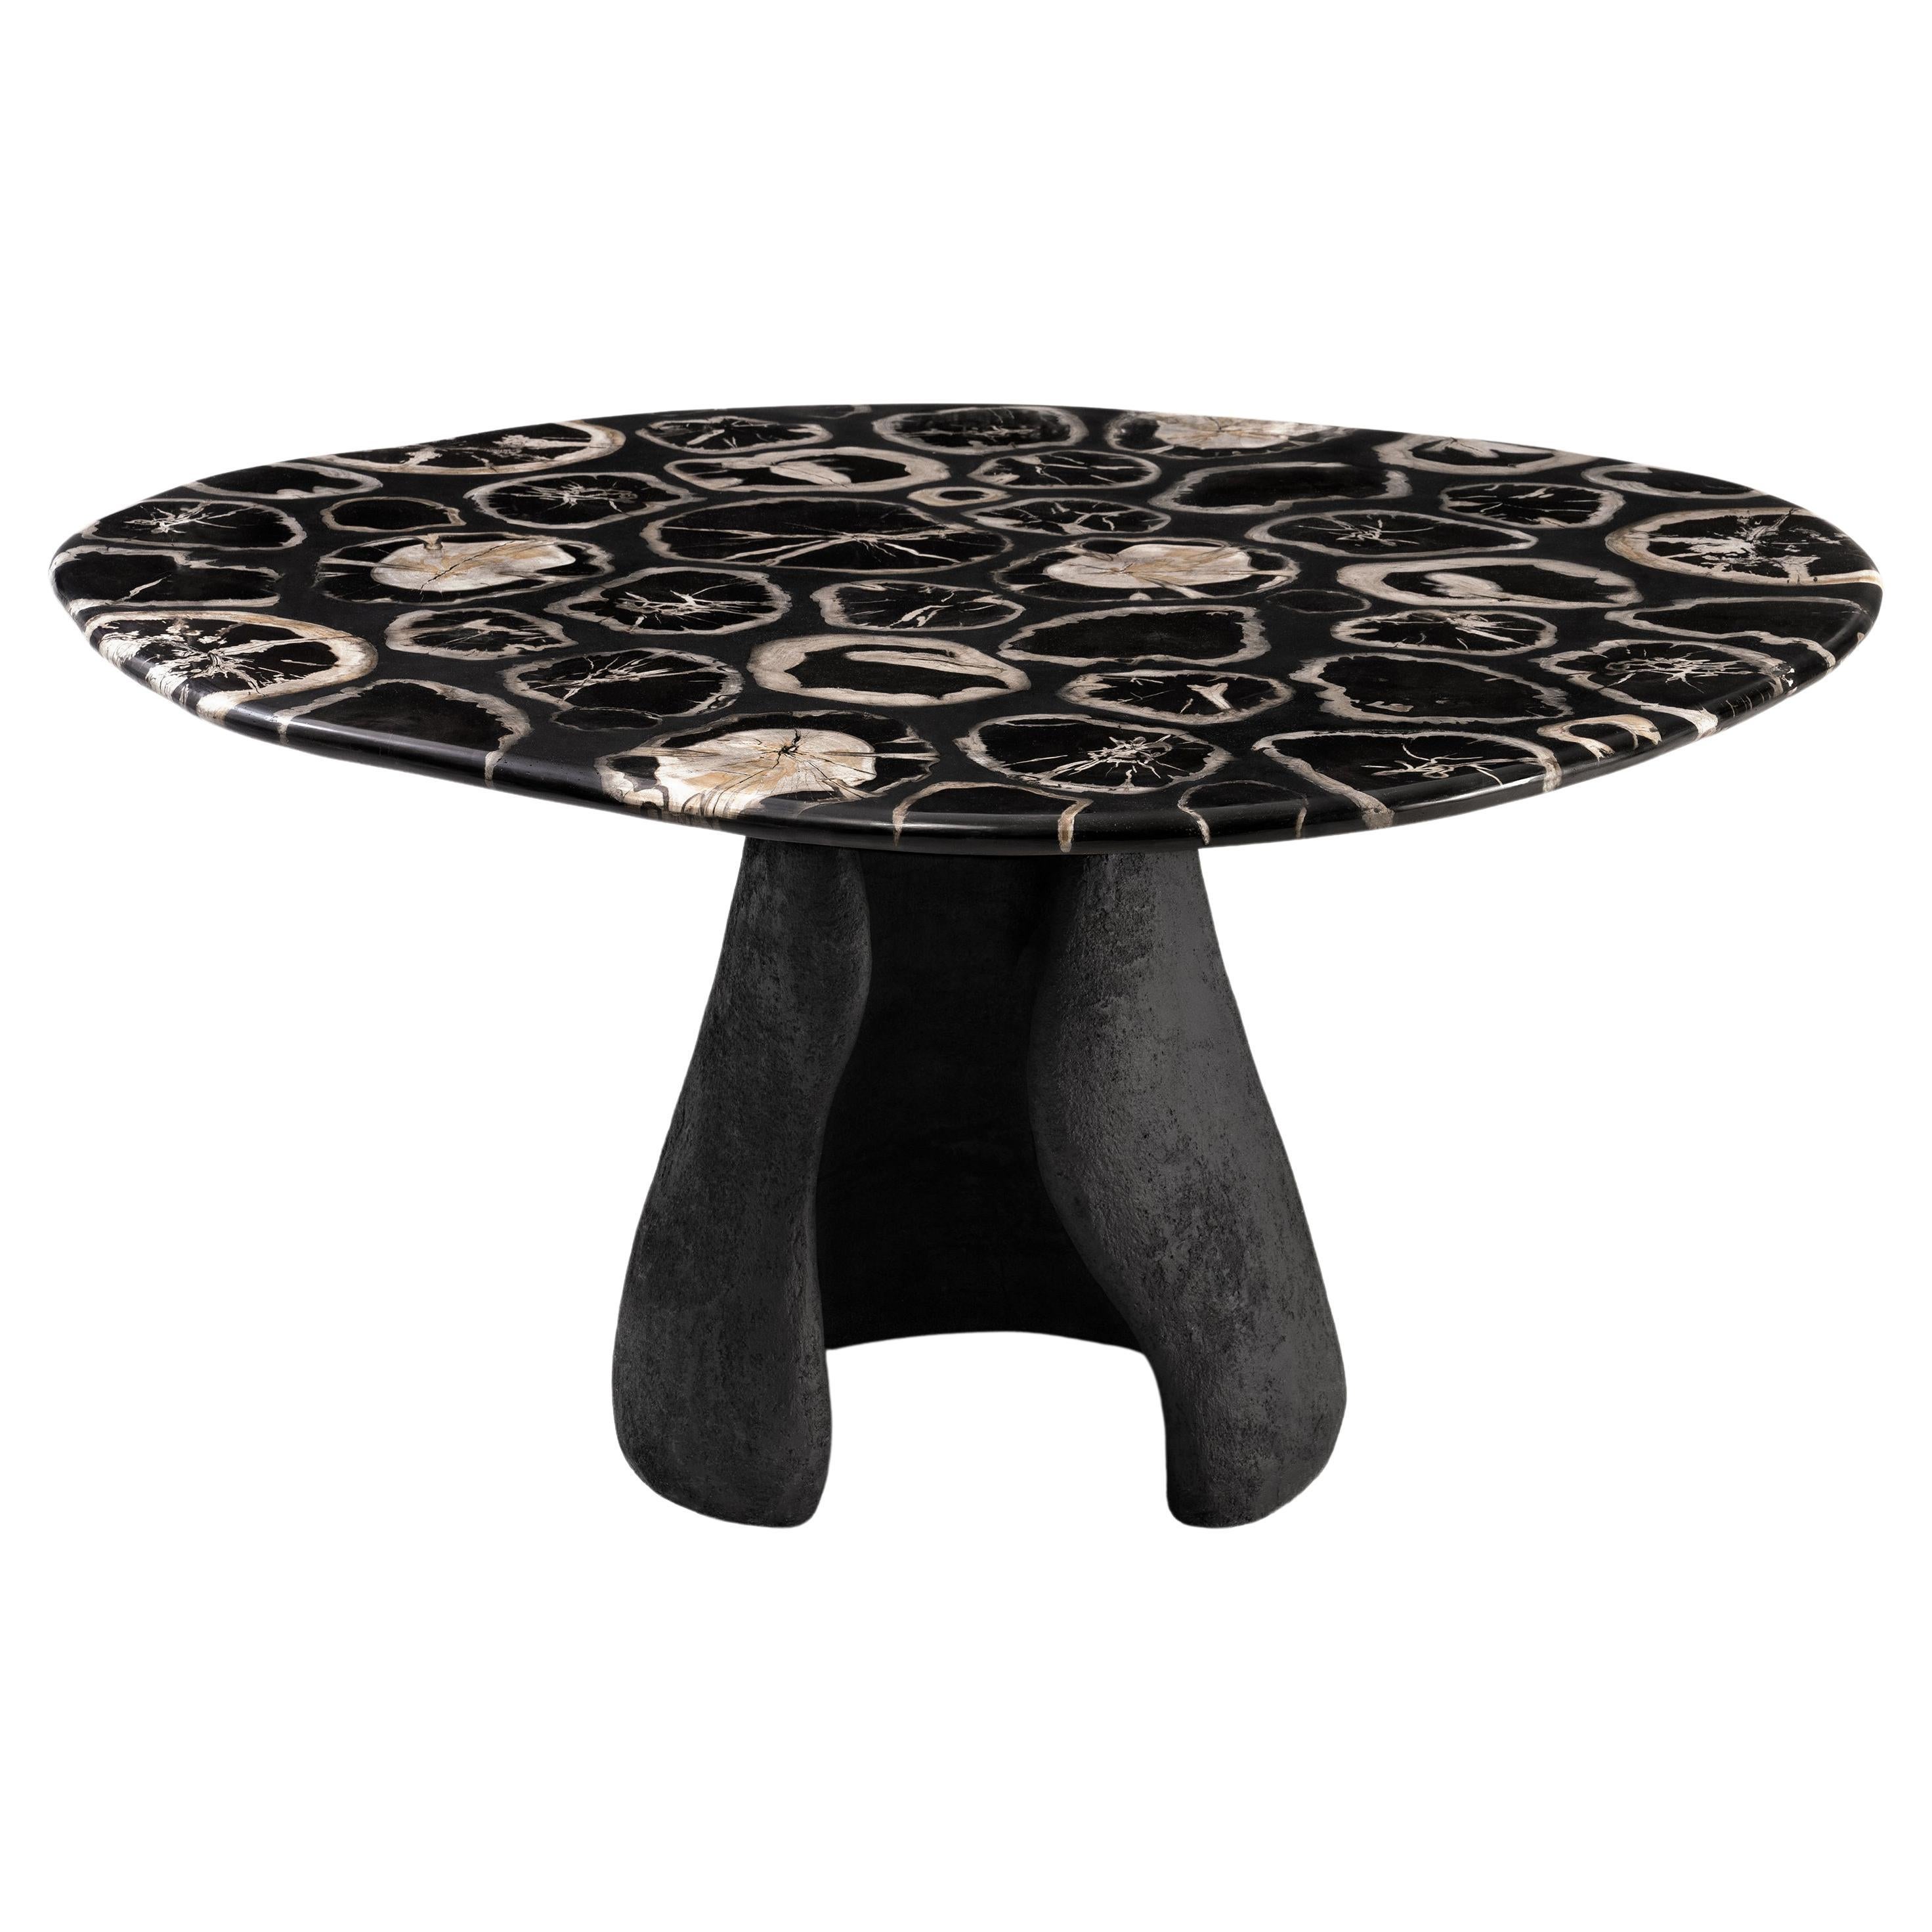 True Grit • Sculptural Petrified Wood Dining Table by Odditi For Sale